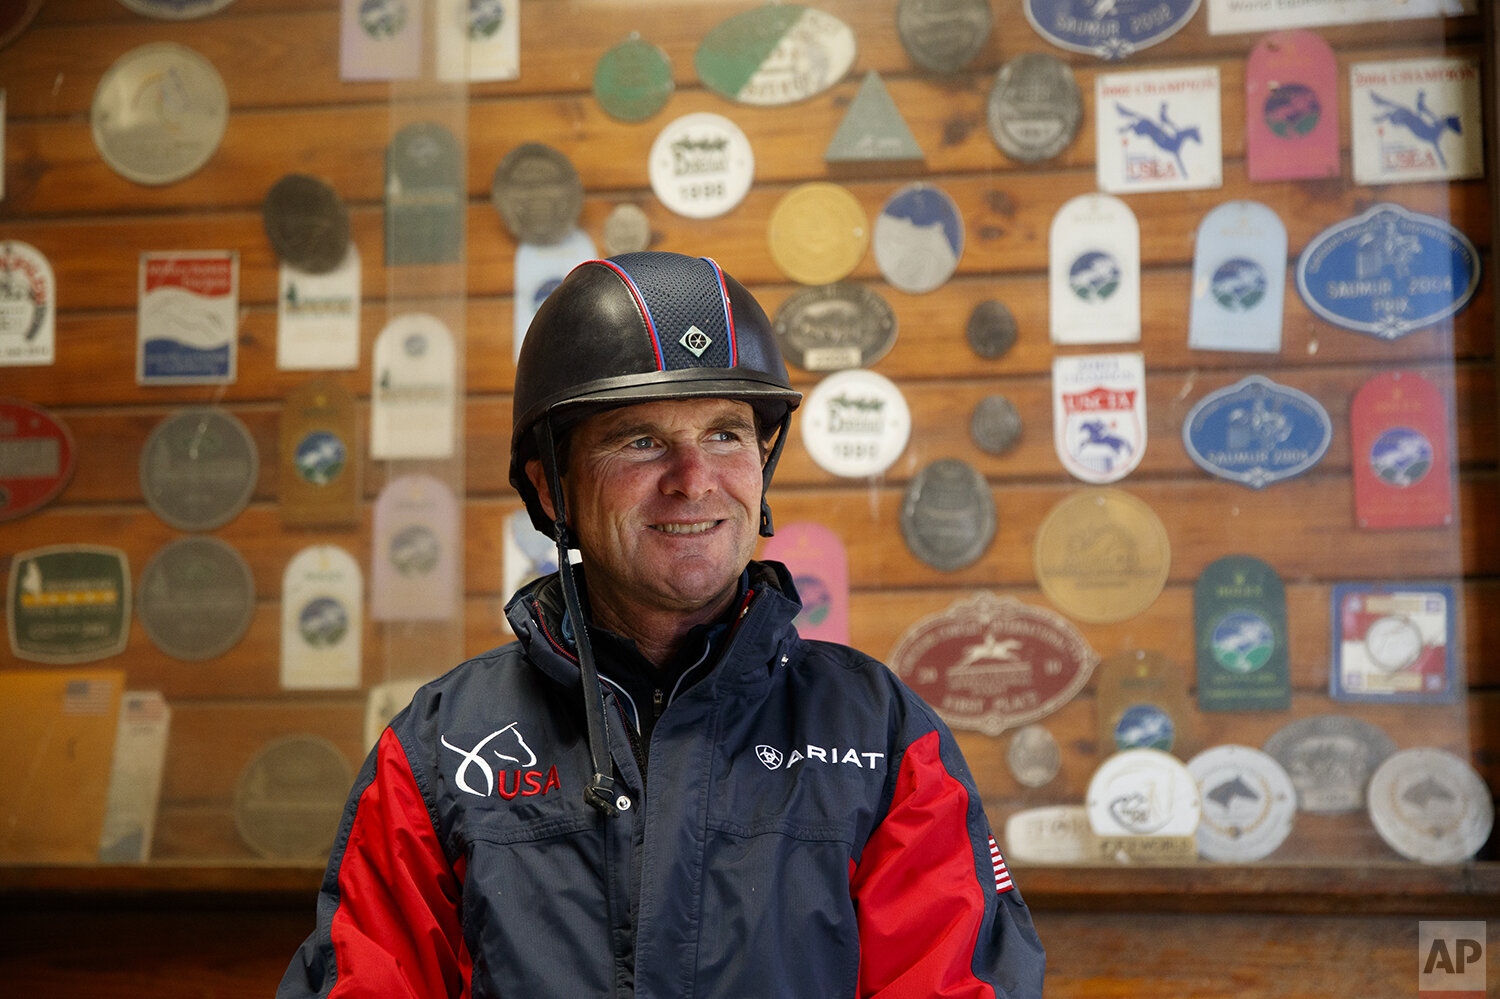  Phillip Dutton, a medal-winning equestrian on the U.S. Olympic team, poses for a photograph after a training session at his farm, Thursday, April 2, 2020, in West Grove, Pa. (AP Photo/Matt Slocum) 